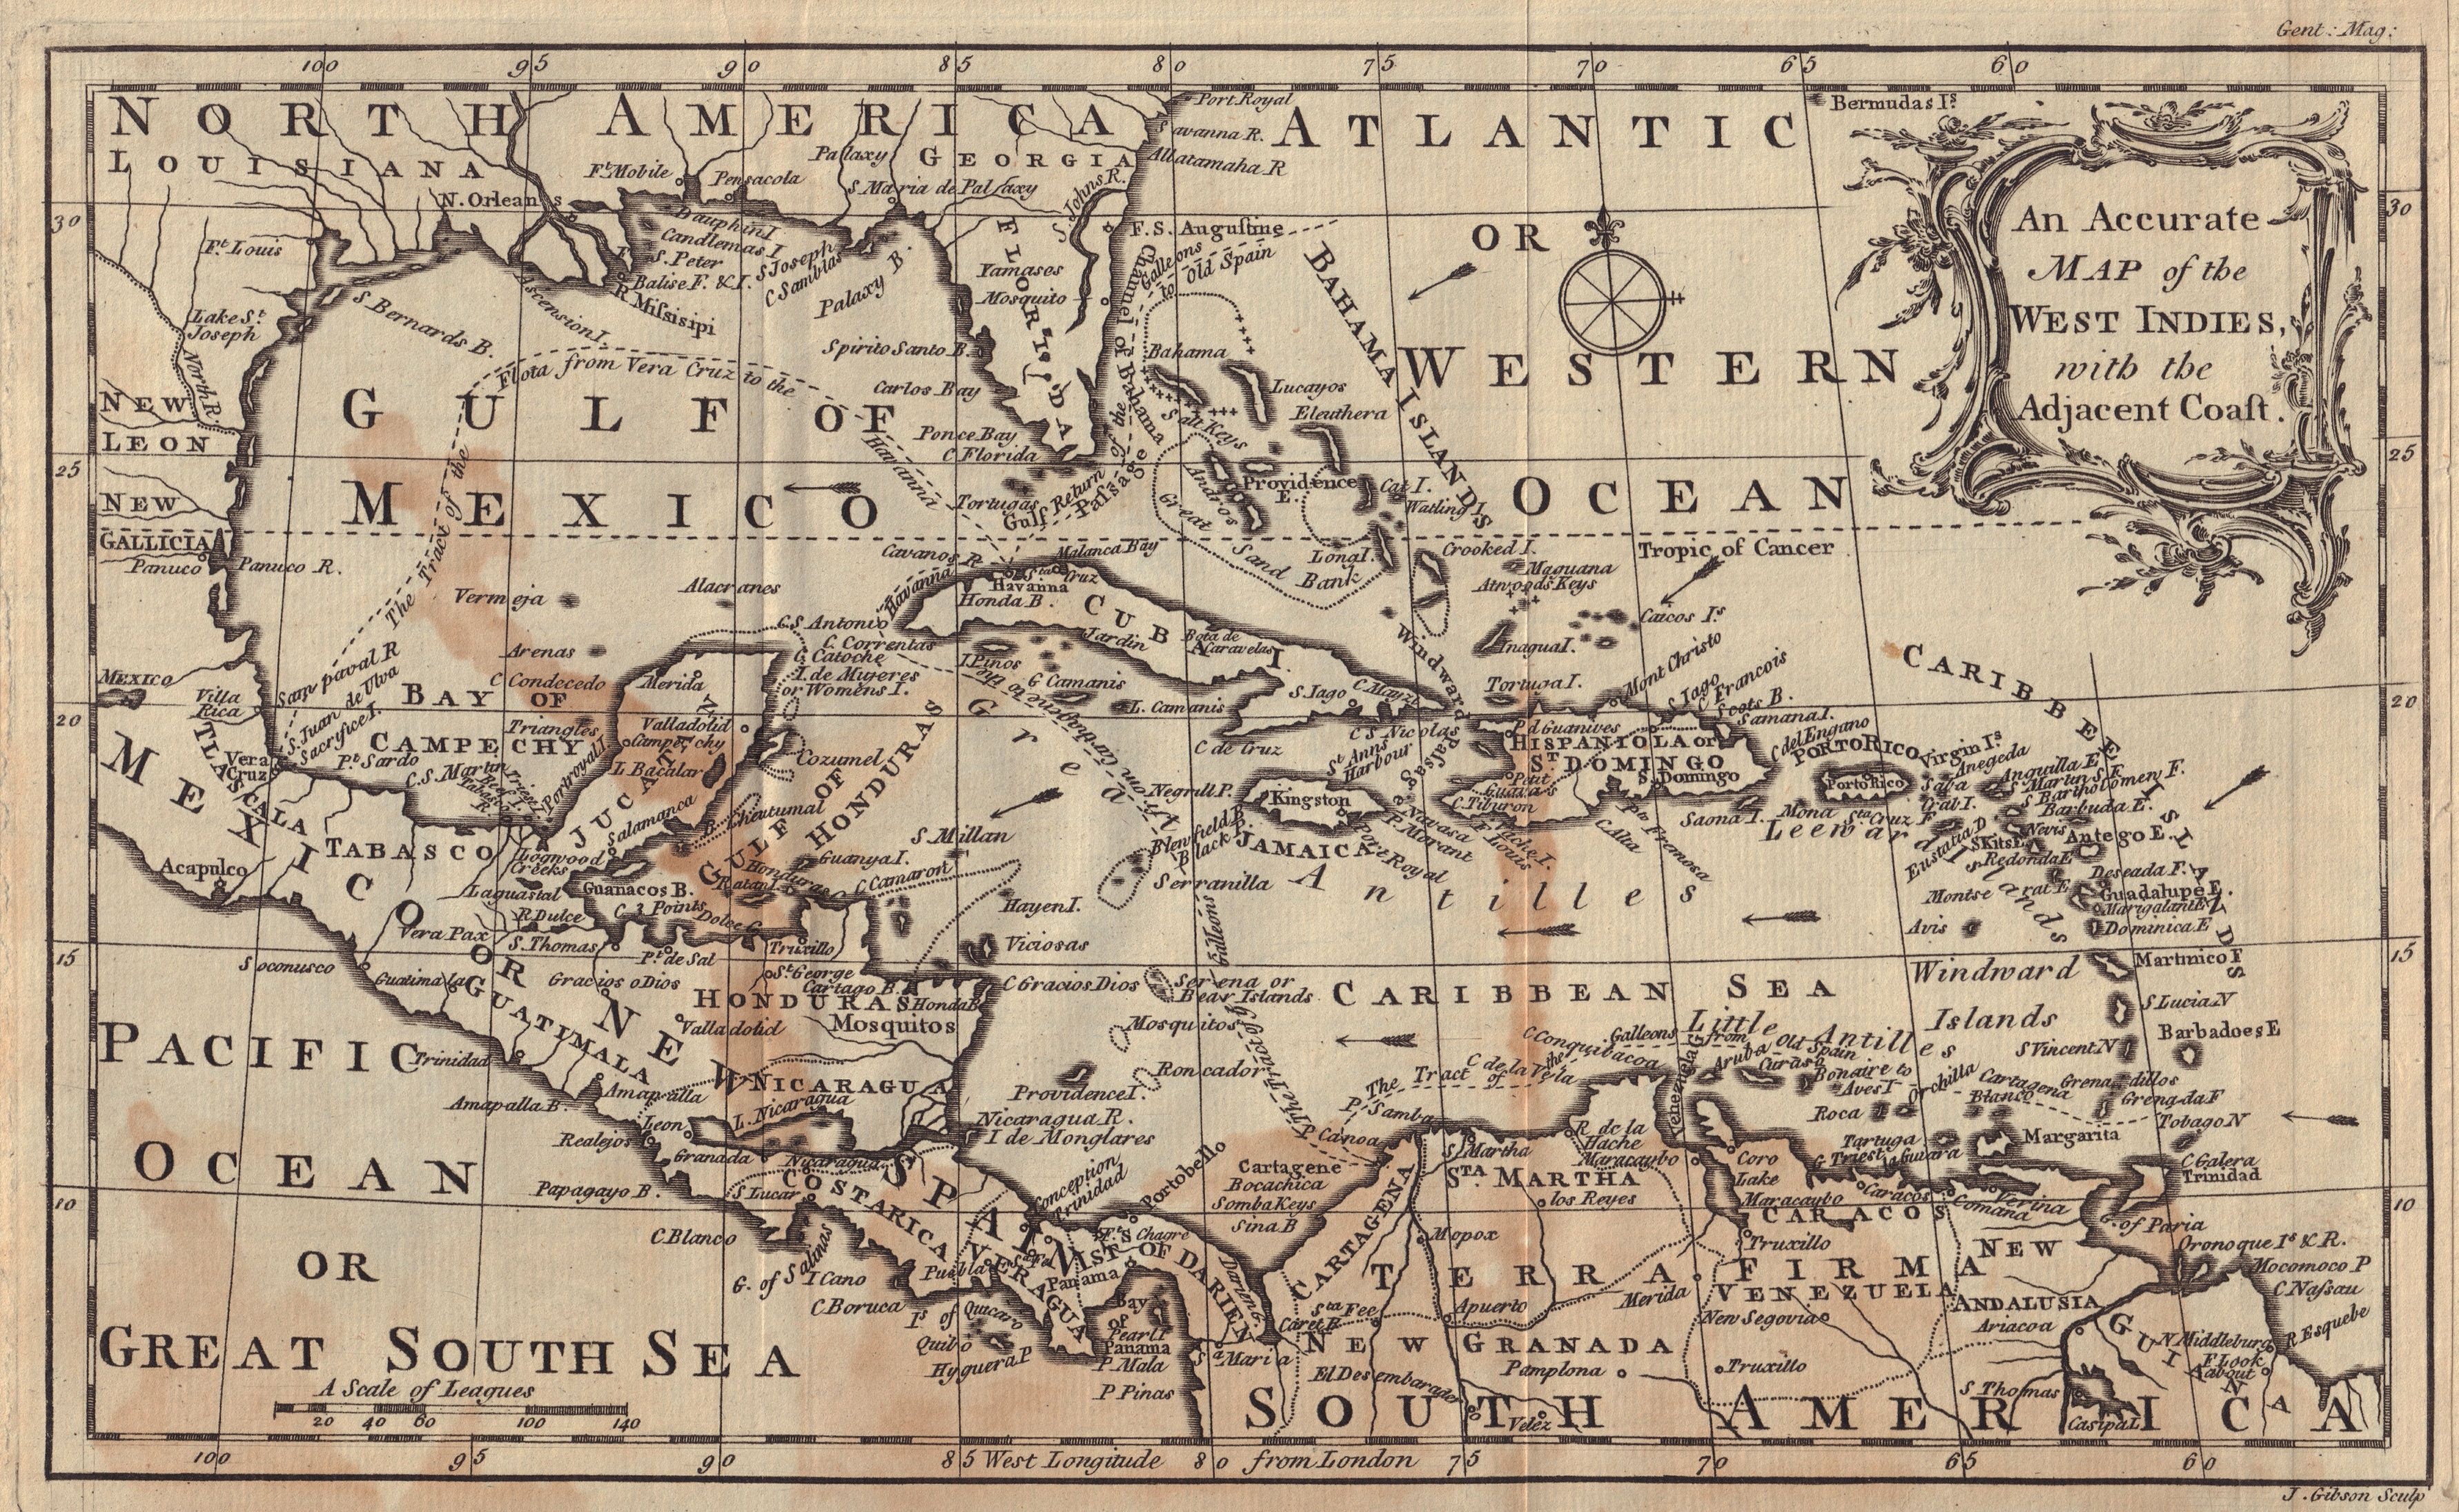 An Accurate Map of the West Indies with the Adjacent Coast. GIBSON 1762